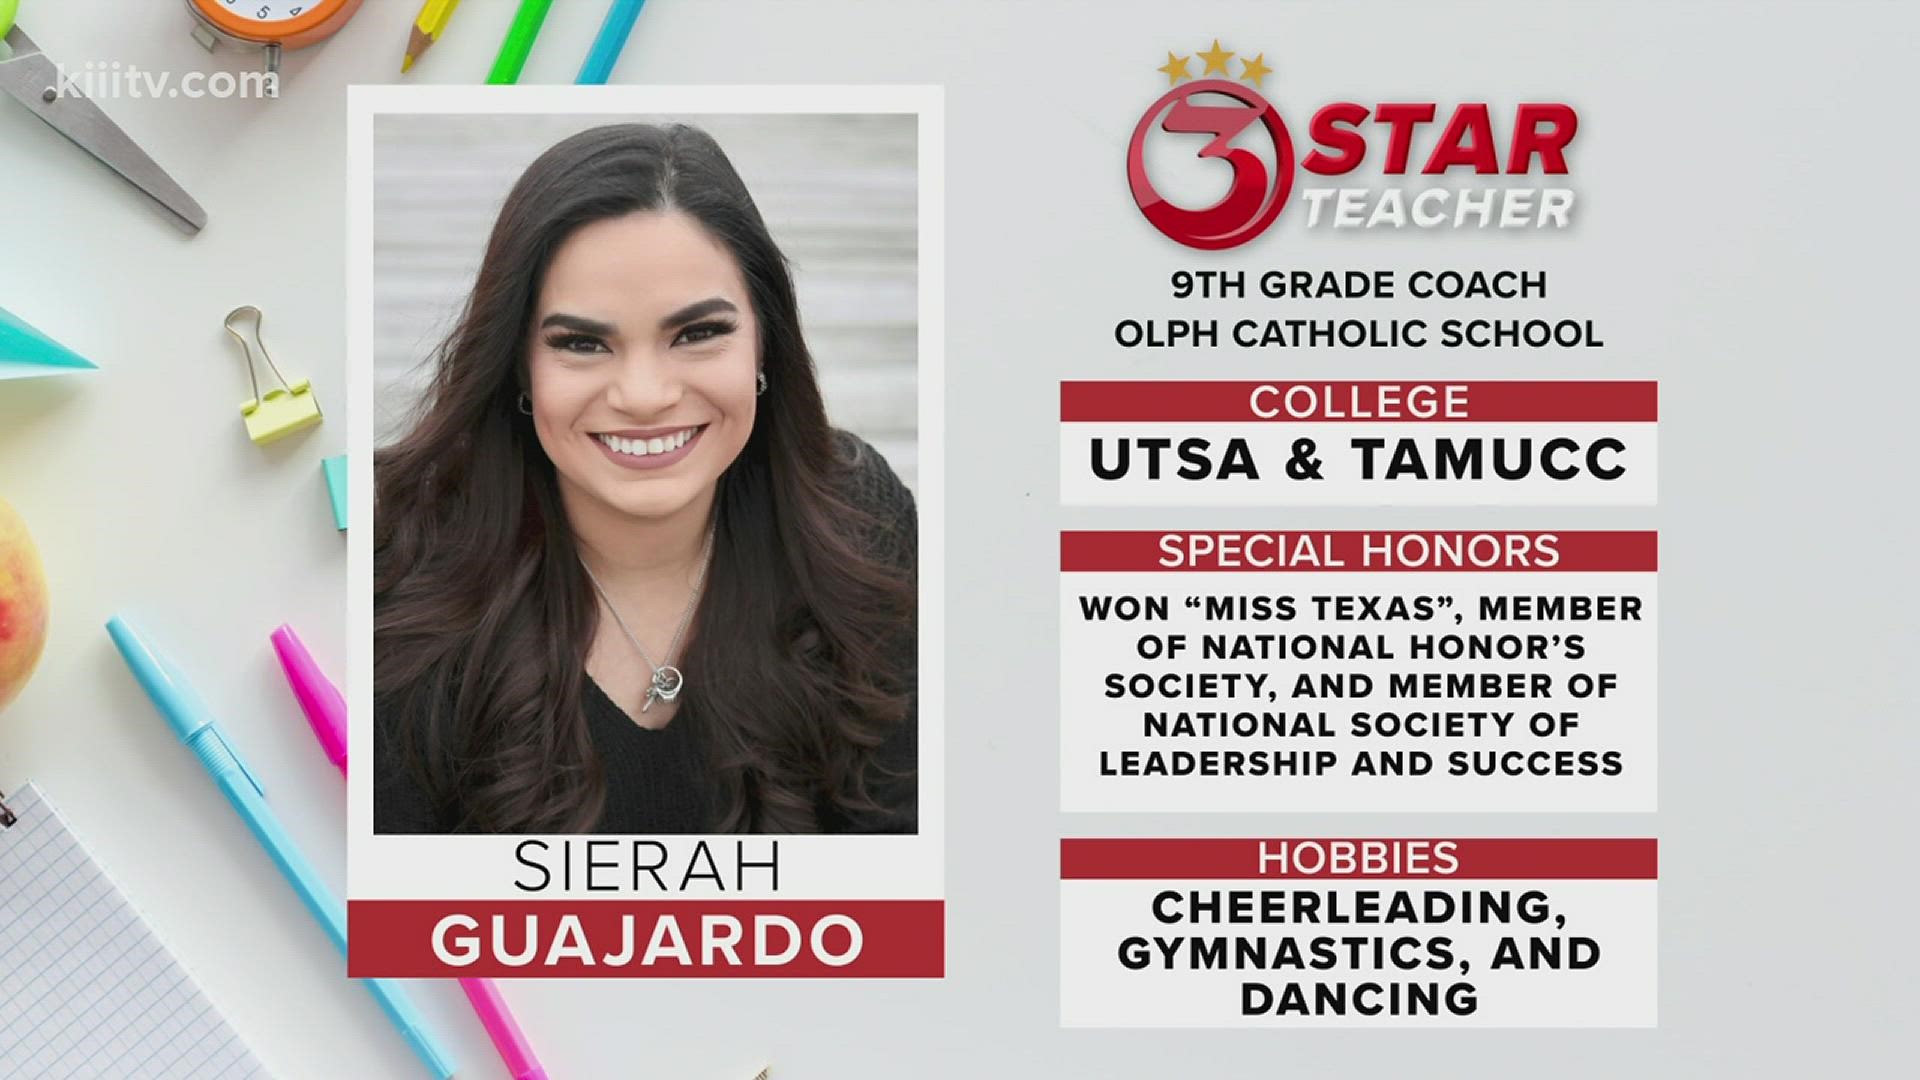 Sierah Guajardo is a physical education coach and math teacher for 9th graders at Our Lady of Perpetual Help Catholic School in Corpus Christi.